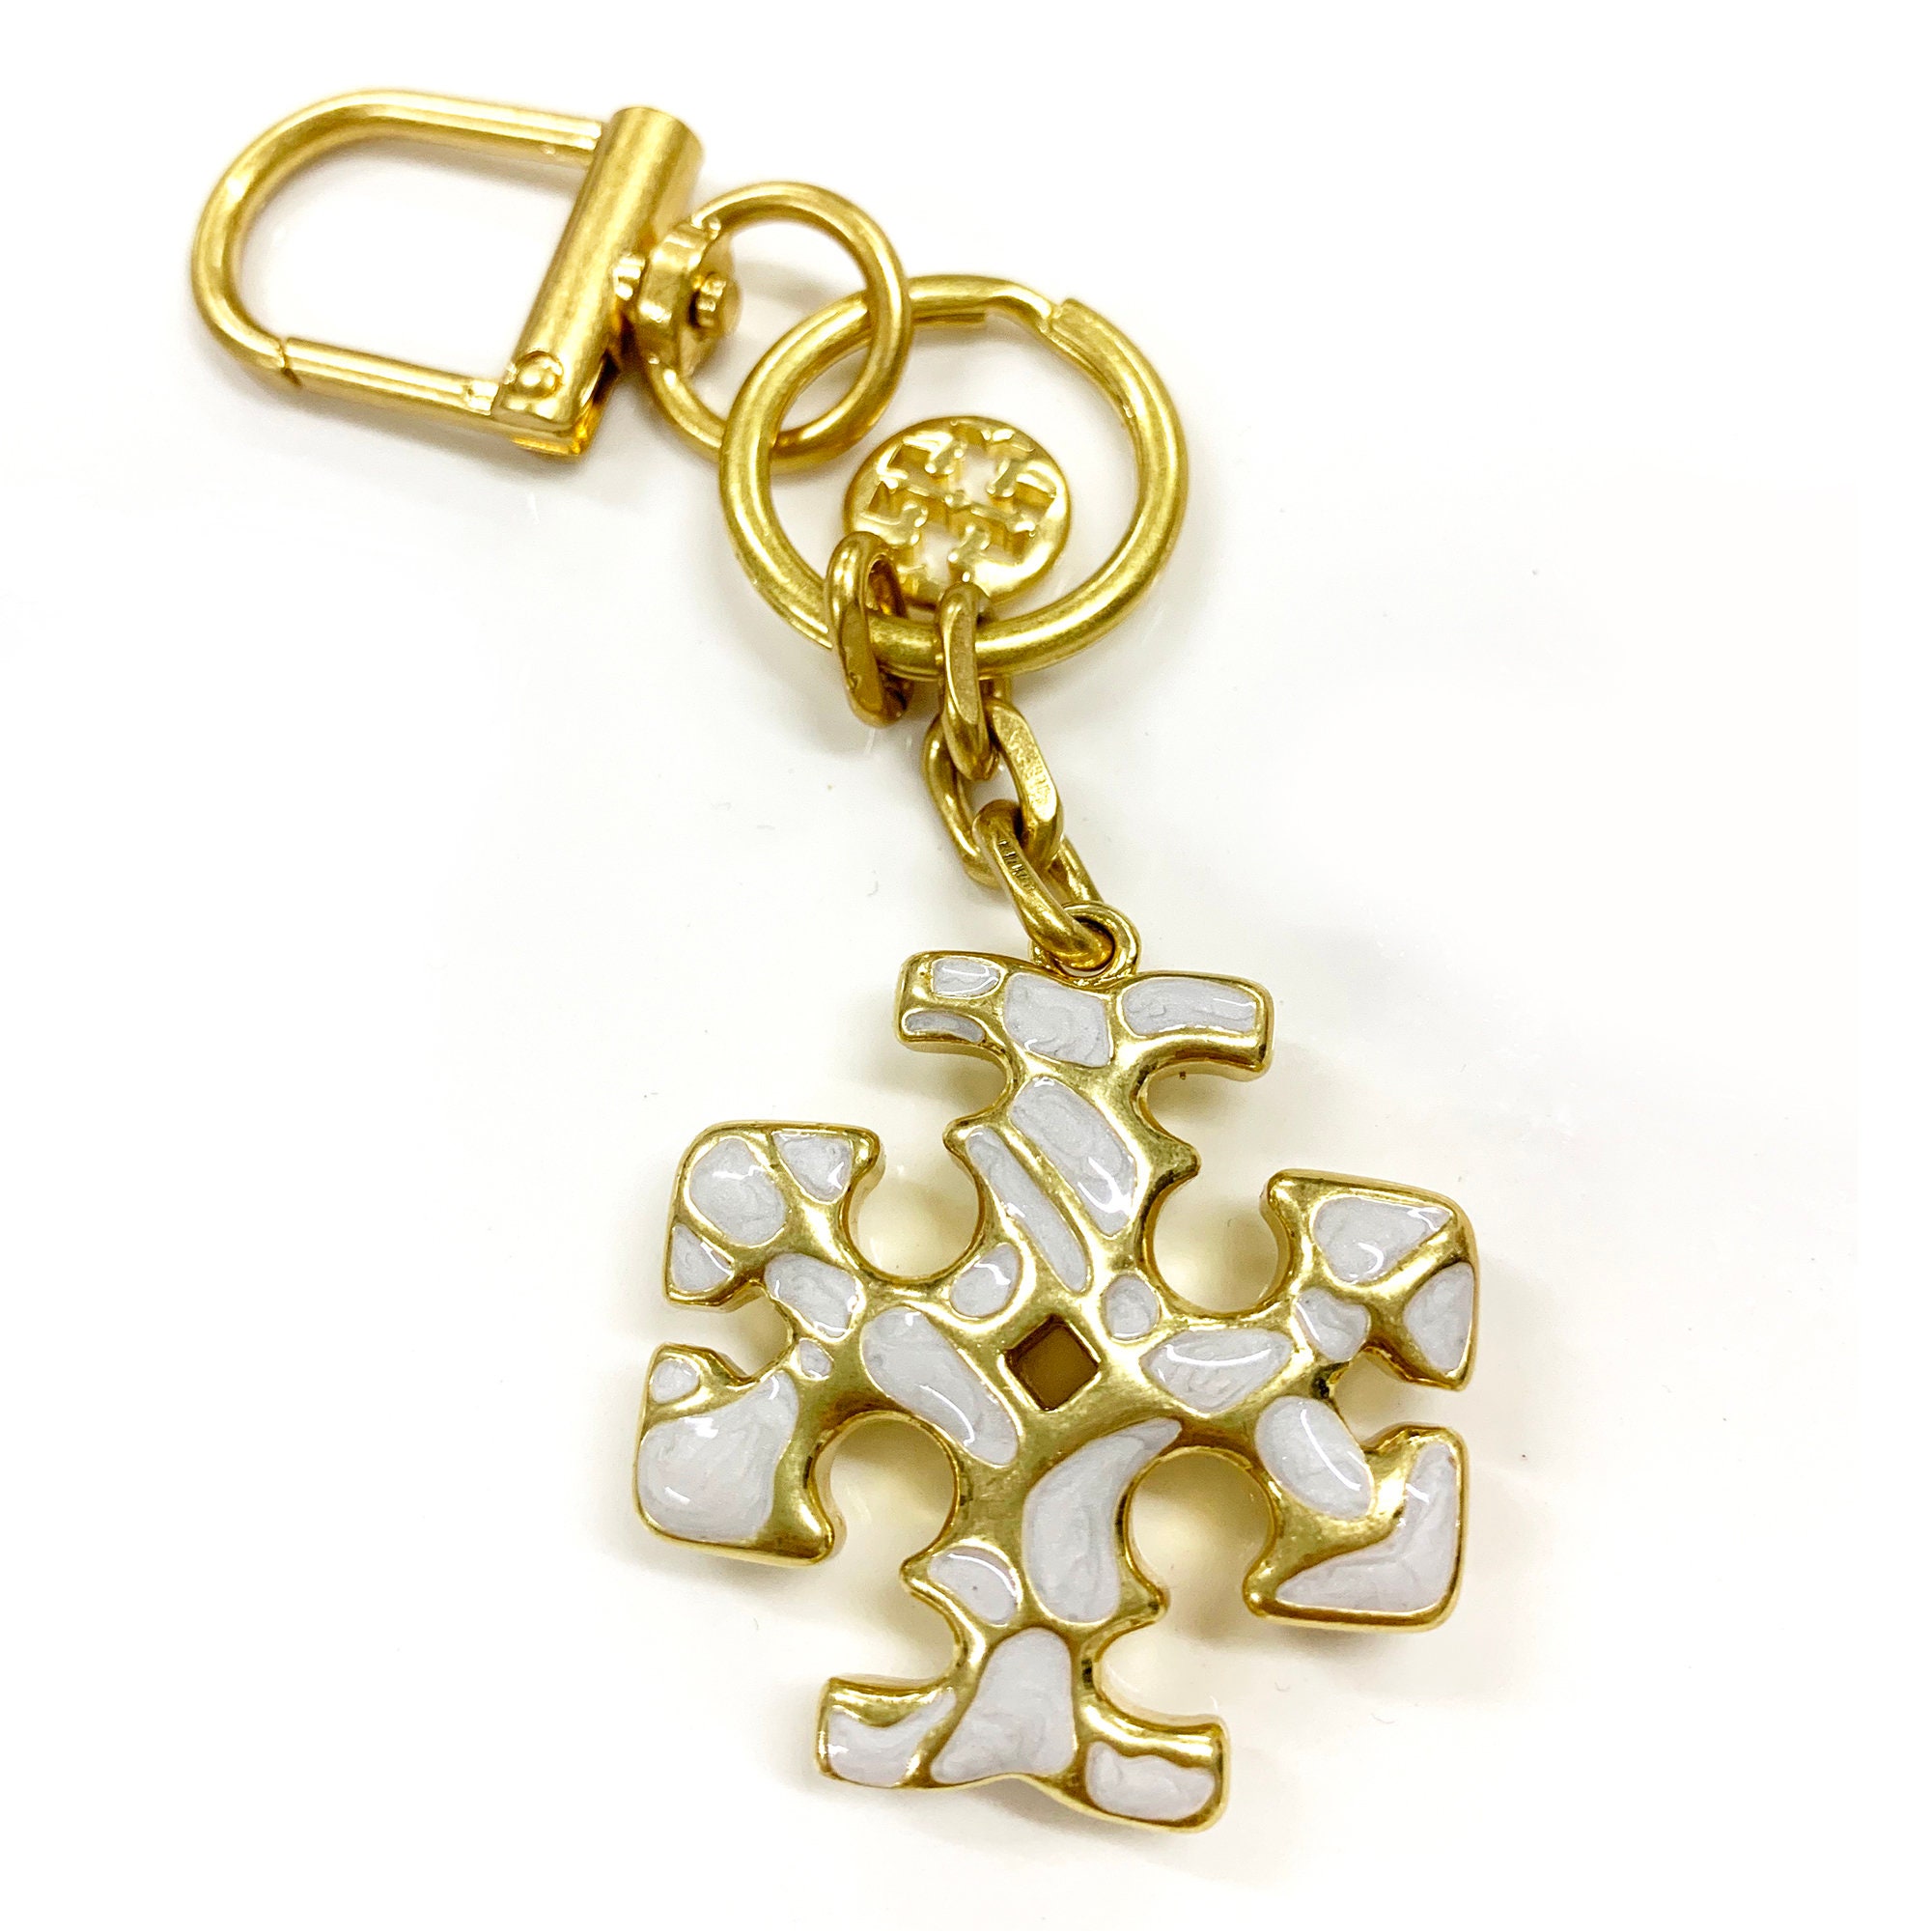 Gold Keychain Tory Burch Kira Mosaic Mother Of Pearl Keyring Gifts For Her  Valentines Day Gifts Birthday Gifts Mothers Day Gifts Gold gifts